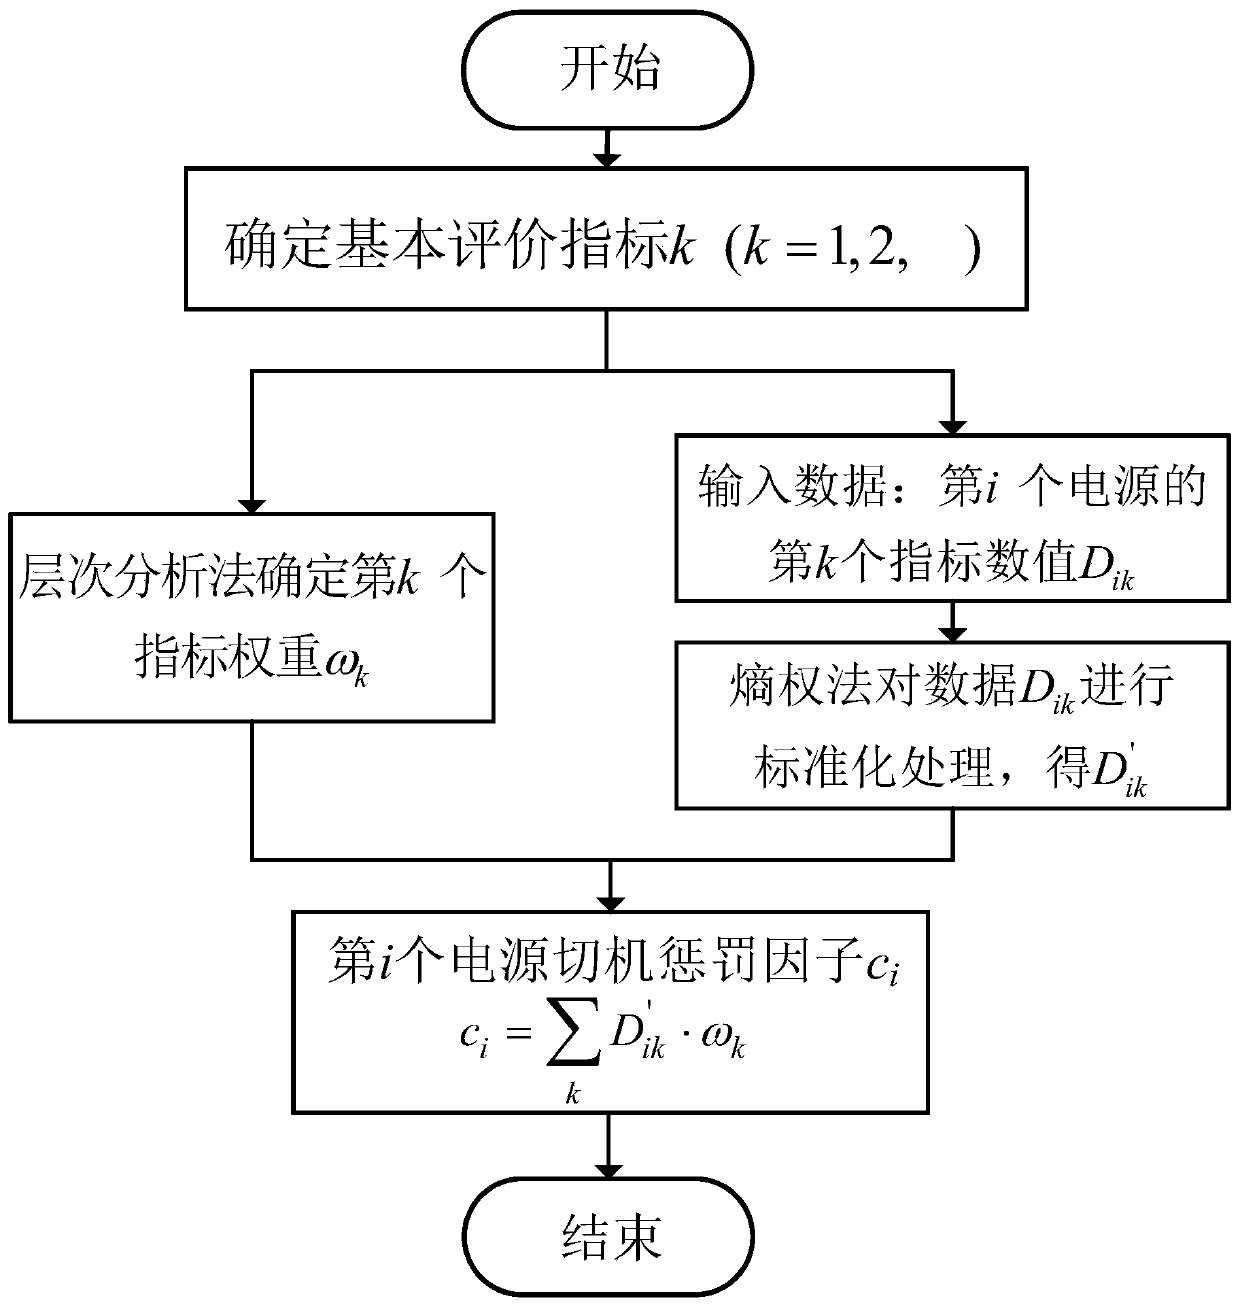 Optimized generator tripping capacity acquisition method for suppressing high-frequency problem of sending-end power grid